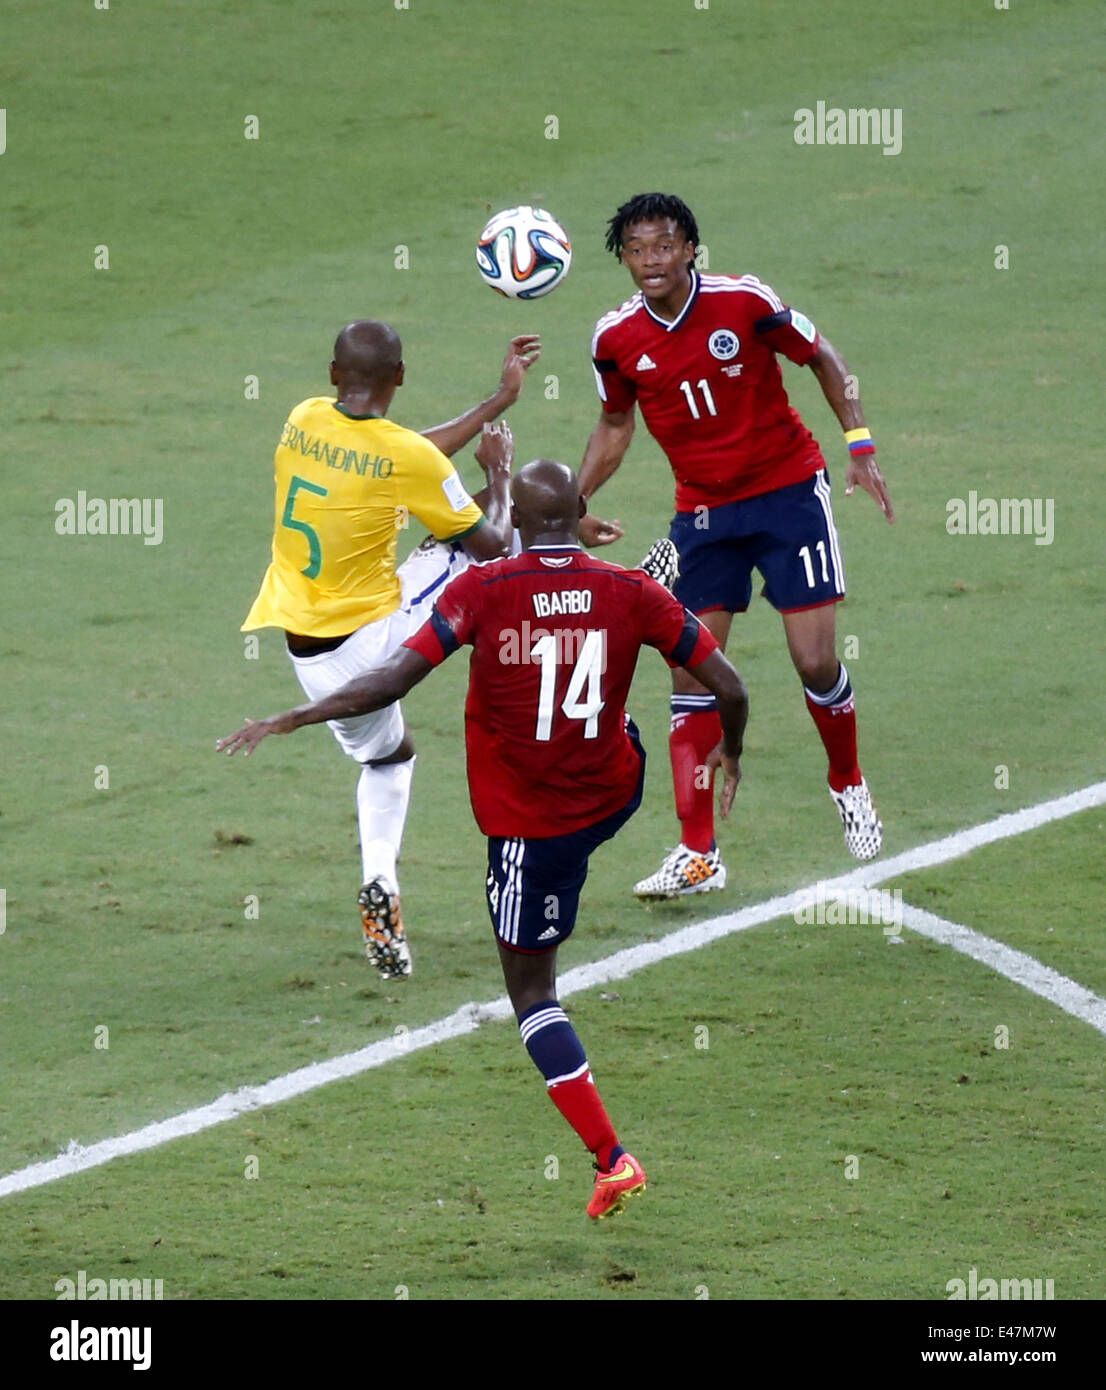 Fortaleza, Brazil. 4th July, 2014. Brazil's Fernandinho (L) competes with Colombia's Victor Ibarbo (C) and Juan Guillermo Cuadrado during a quarter-finals match between Brazil and Colombia of 2014 FIFA World Cup at the Estadio Castelao Stadium in Fortaleza, Brazil, on July 4, 2014. Credit:  Liao Yujie/Xinhua/Alamy Live News Stock Photo